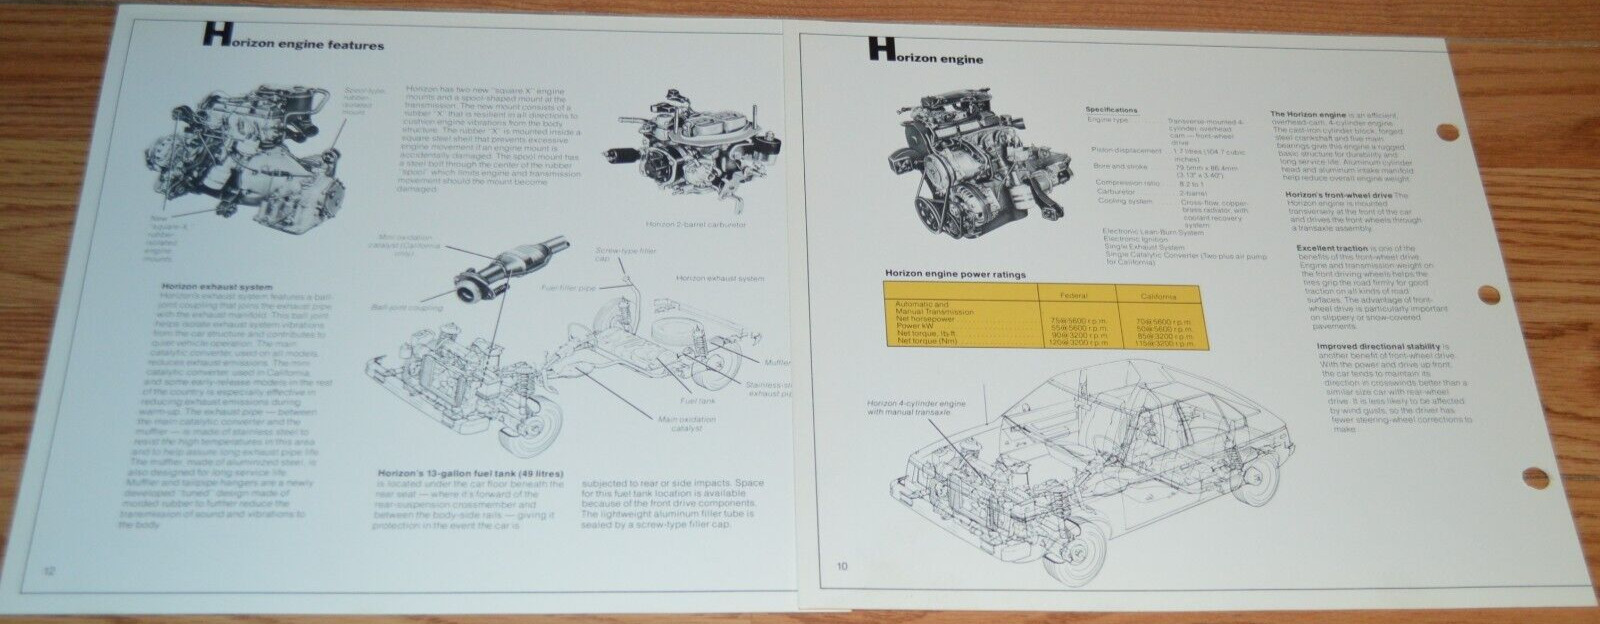 ★1978 PLYMOUTH HORIZON ENGINE FEATURES ORIGINAL DEALER ONLY INFORMATION SHEET 78